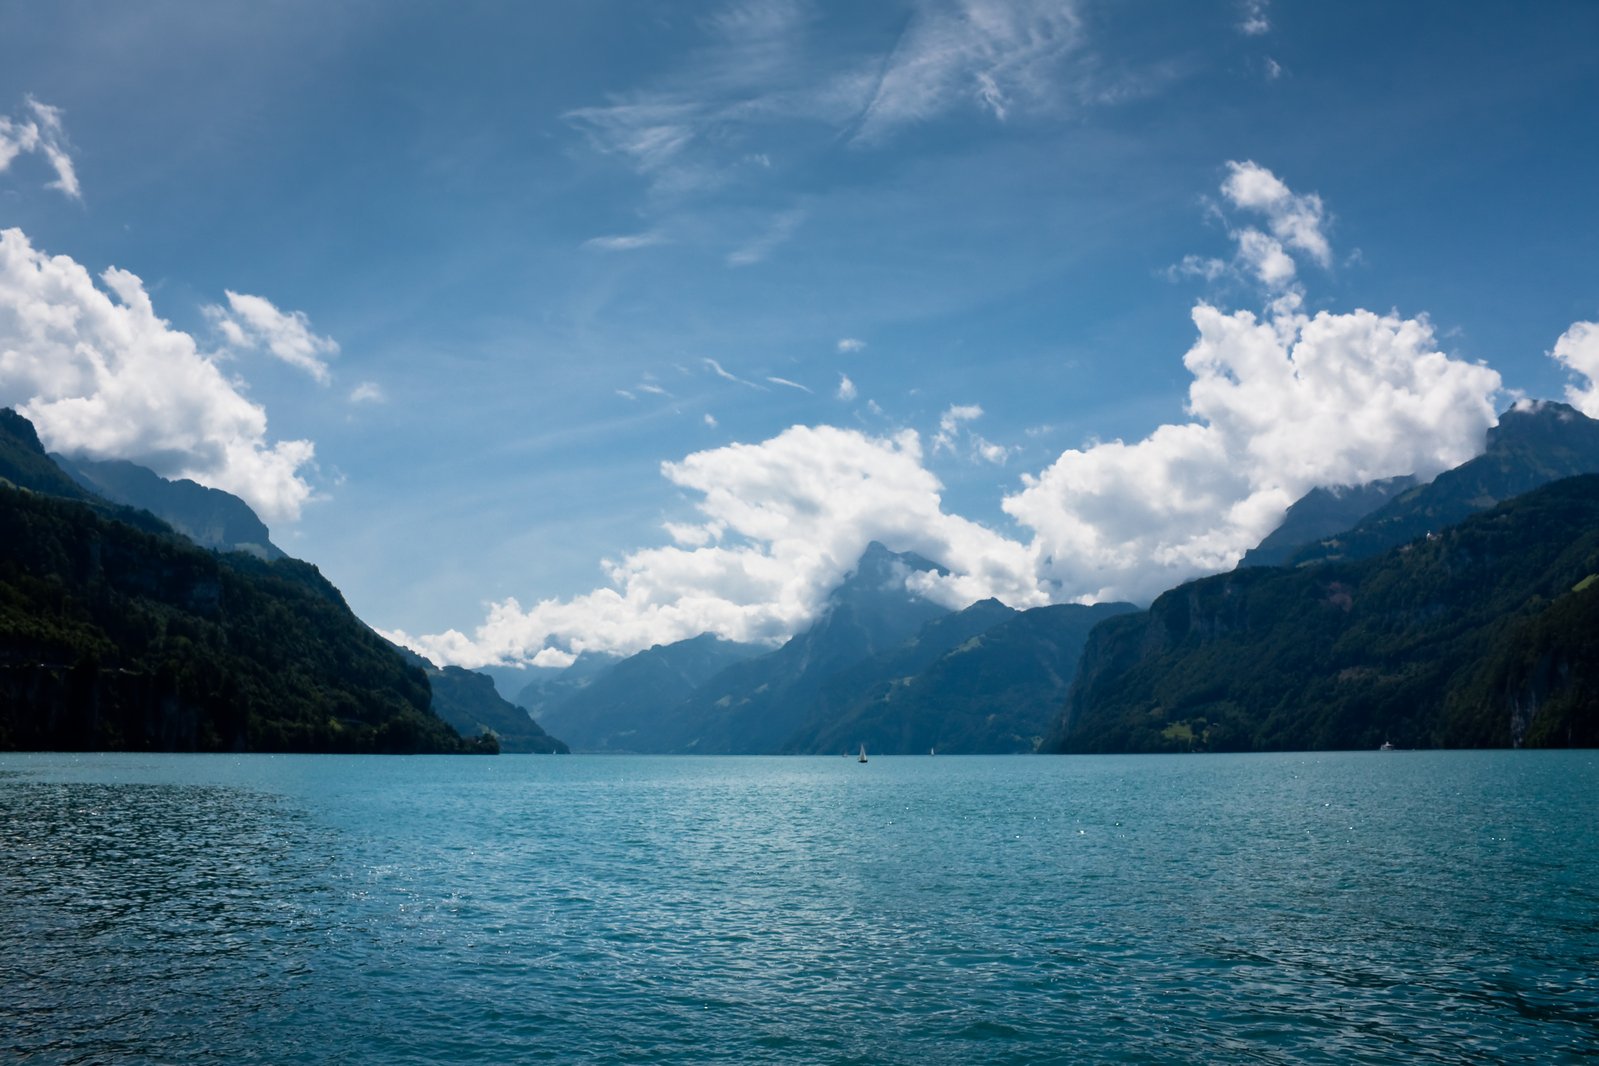 a body of water surrounded by mountains and clouds